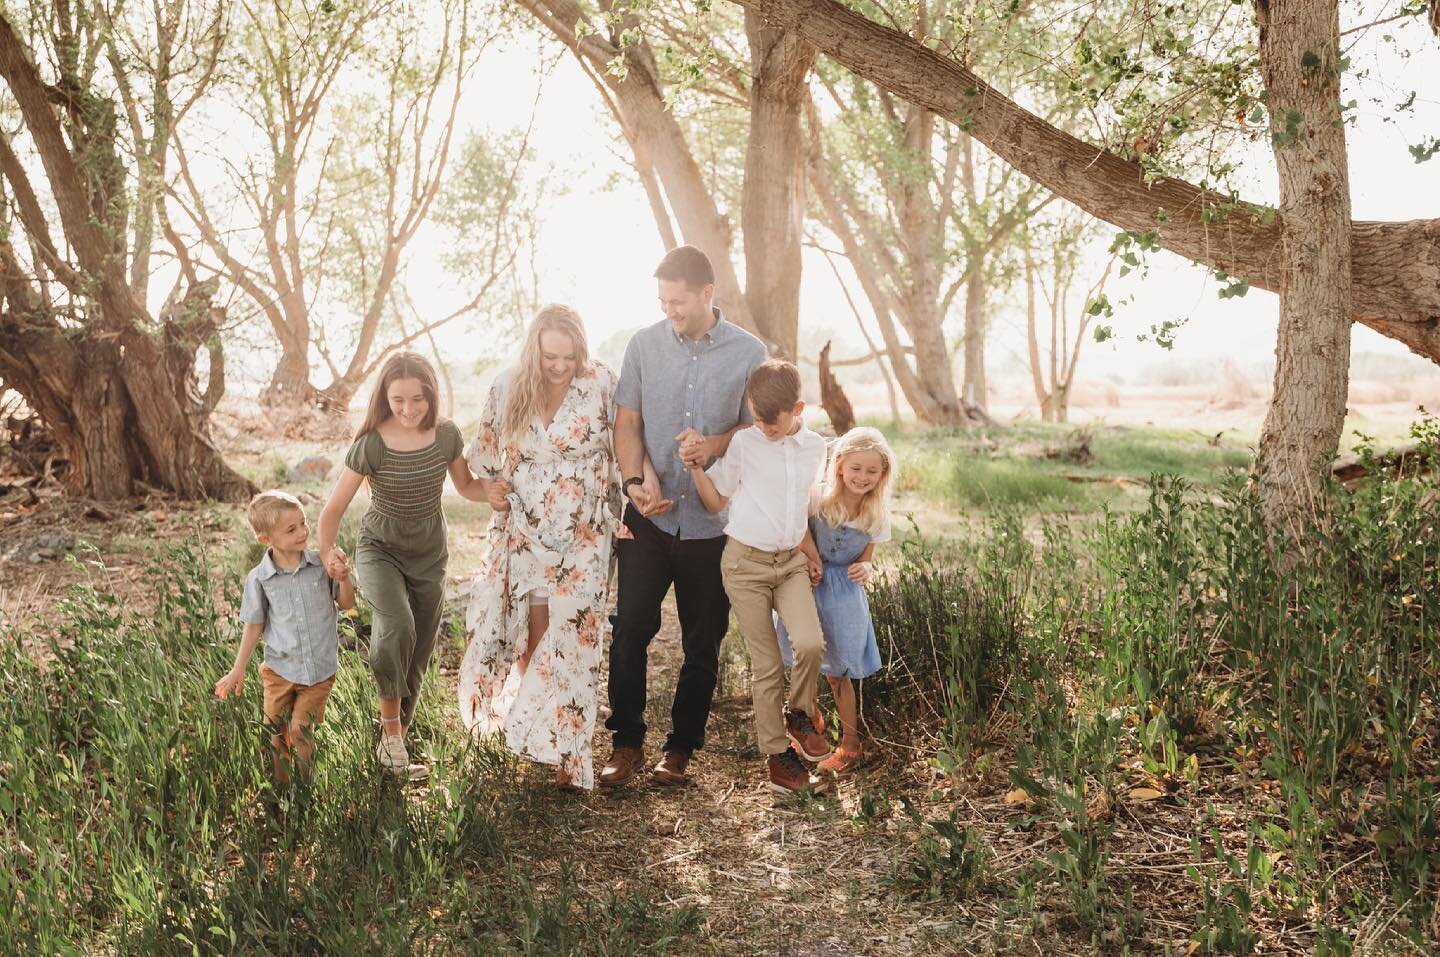 Summer family sessions have officially started and I am so excited to go to all the beautiful places with all the amazing families I get to hang out with this season ❤️